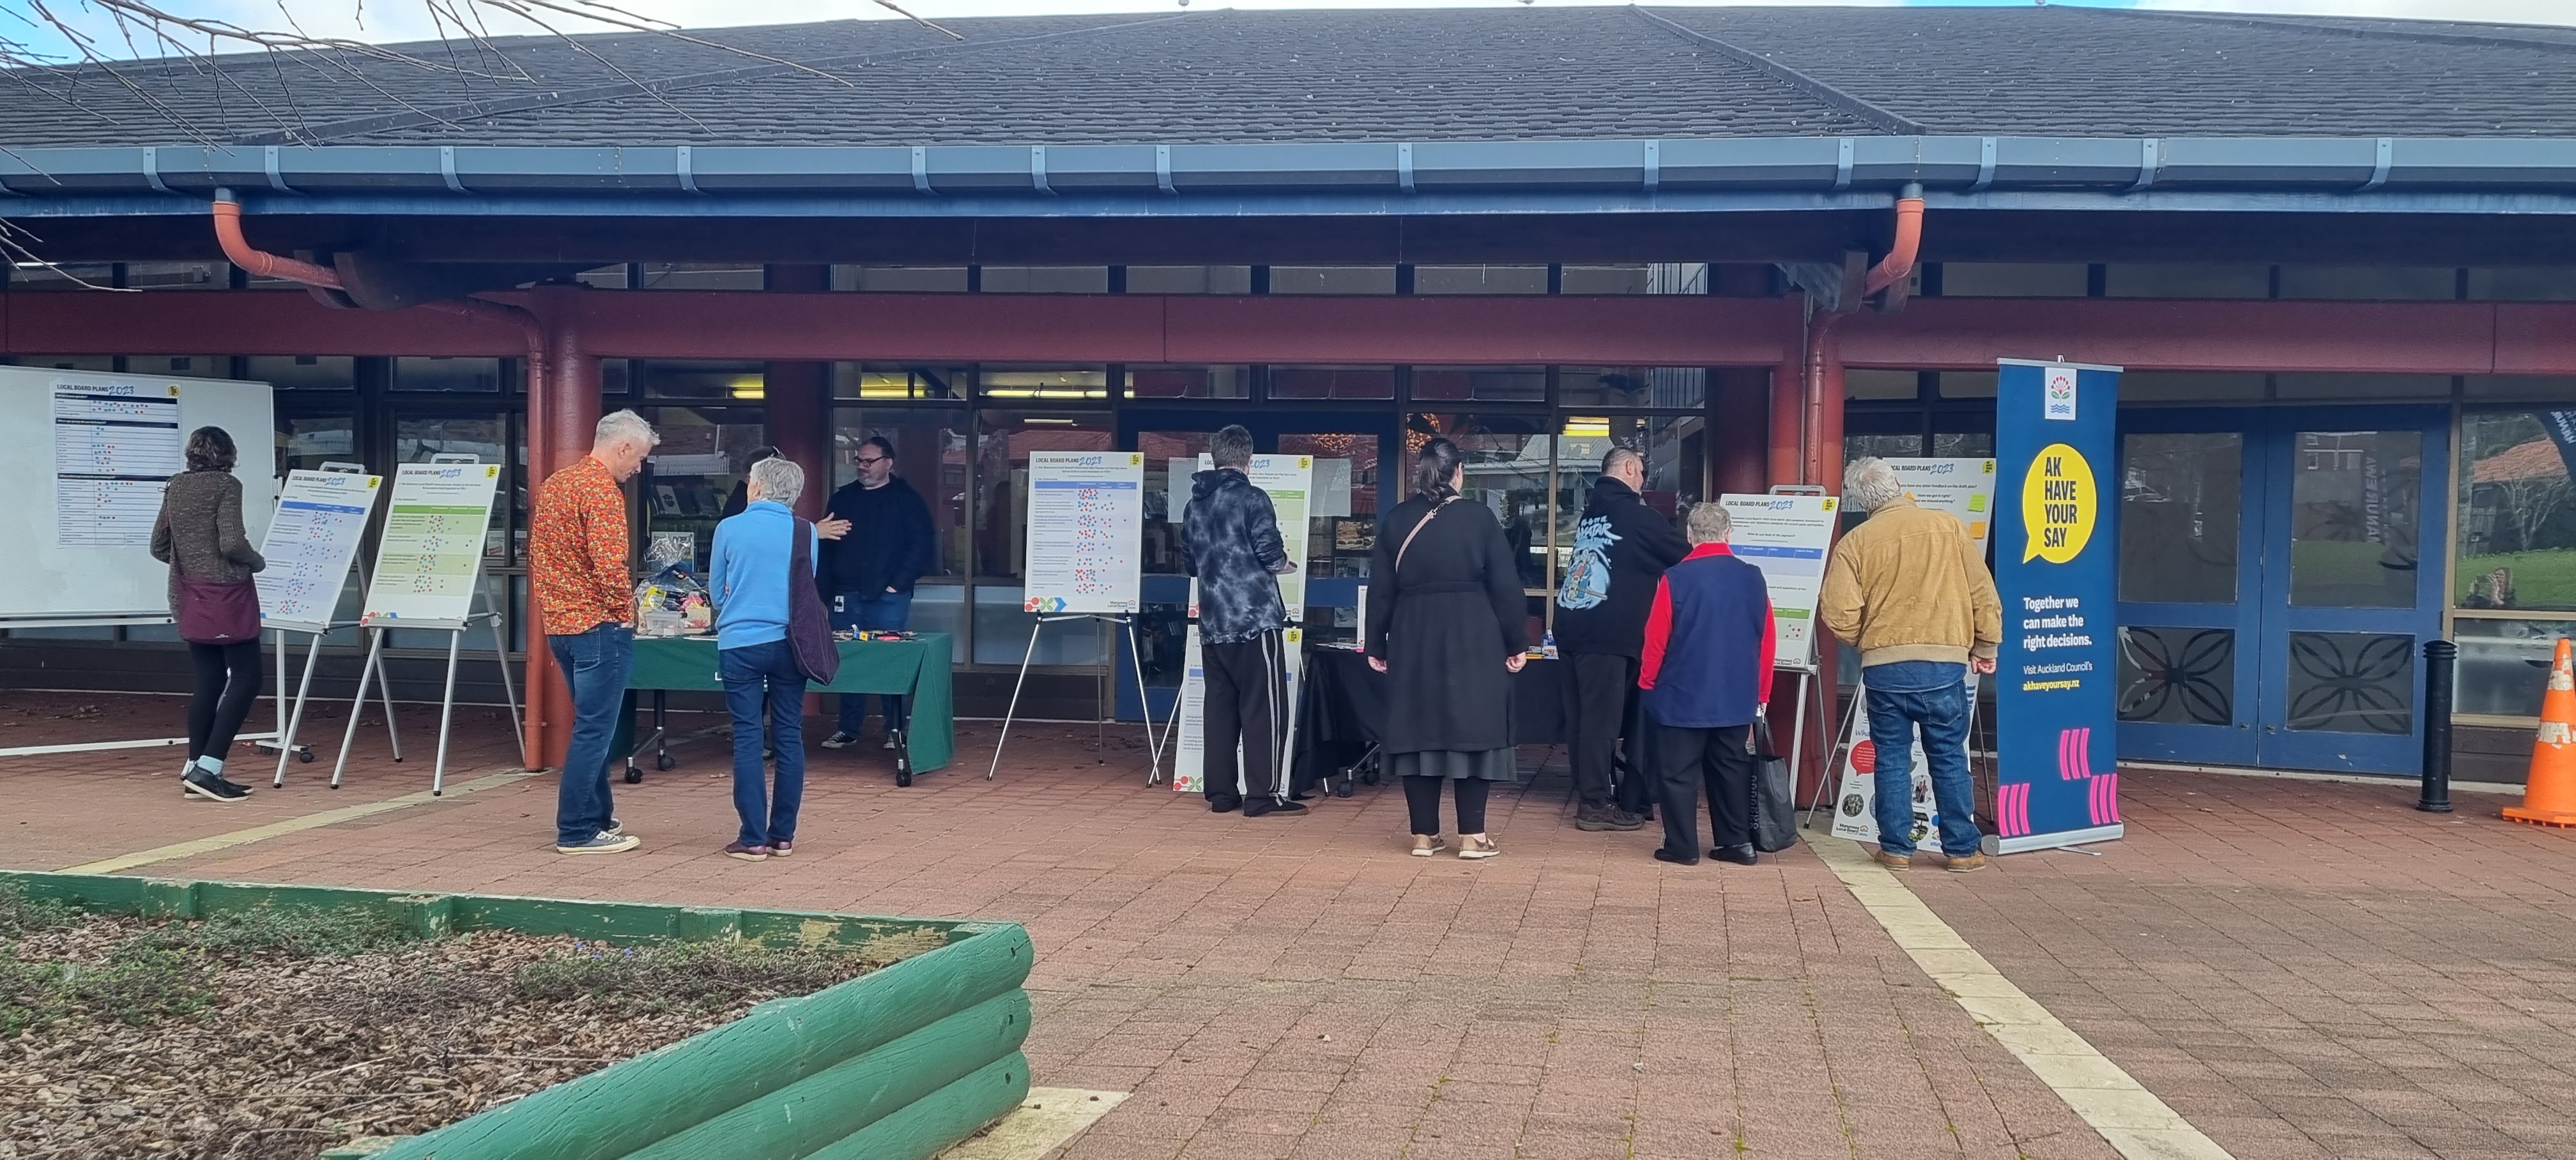 Manurewa got good feedback at its in-person event. While there are no more events, there is still time to submit online.